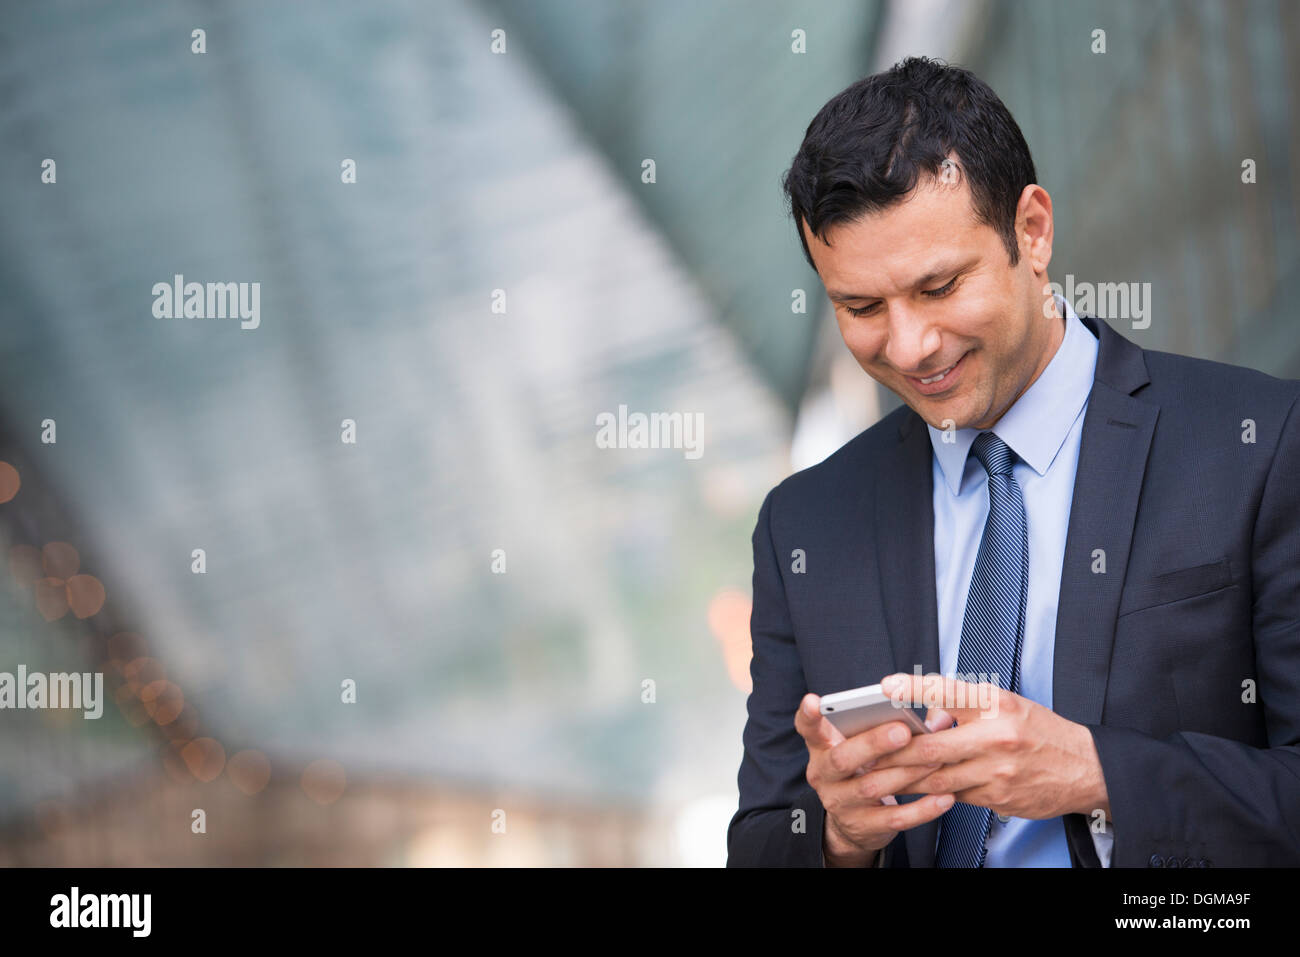 Business people. A latino businessman in business clothes. Using his phone. Stock Photo